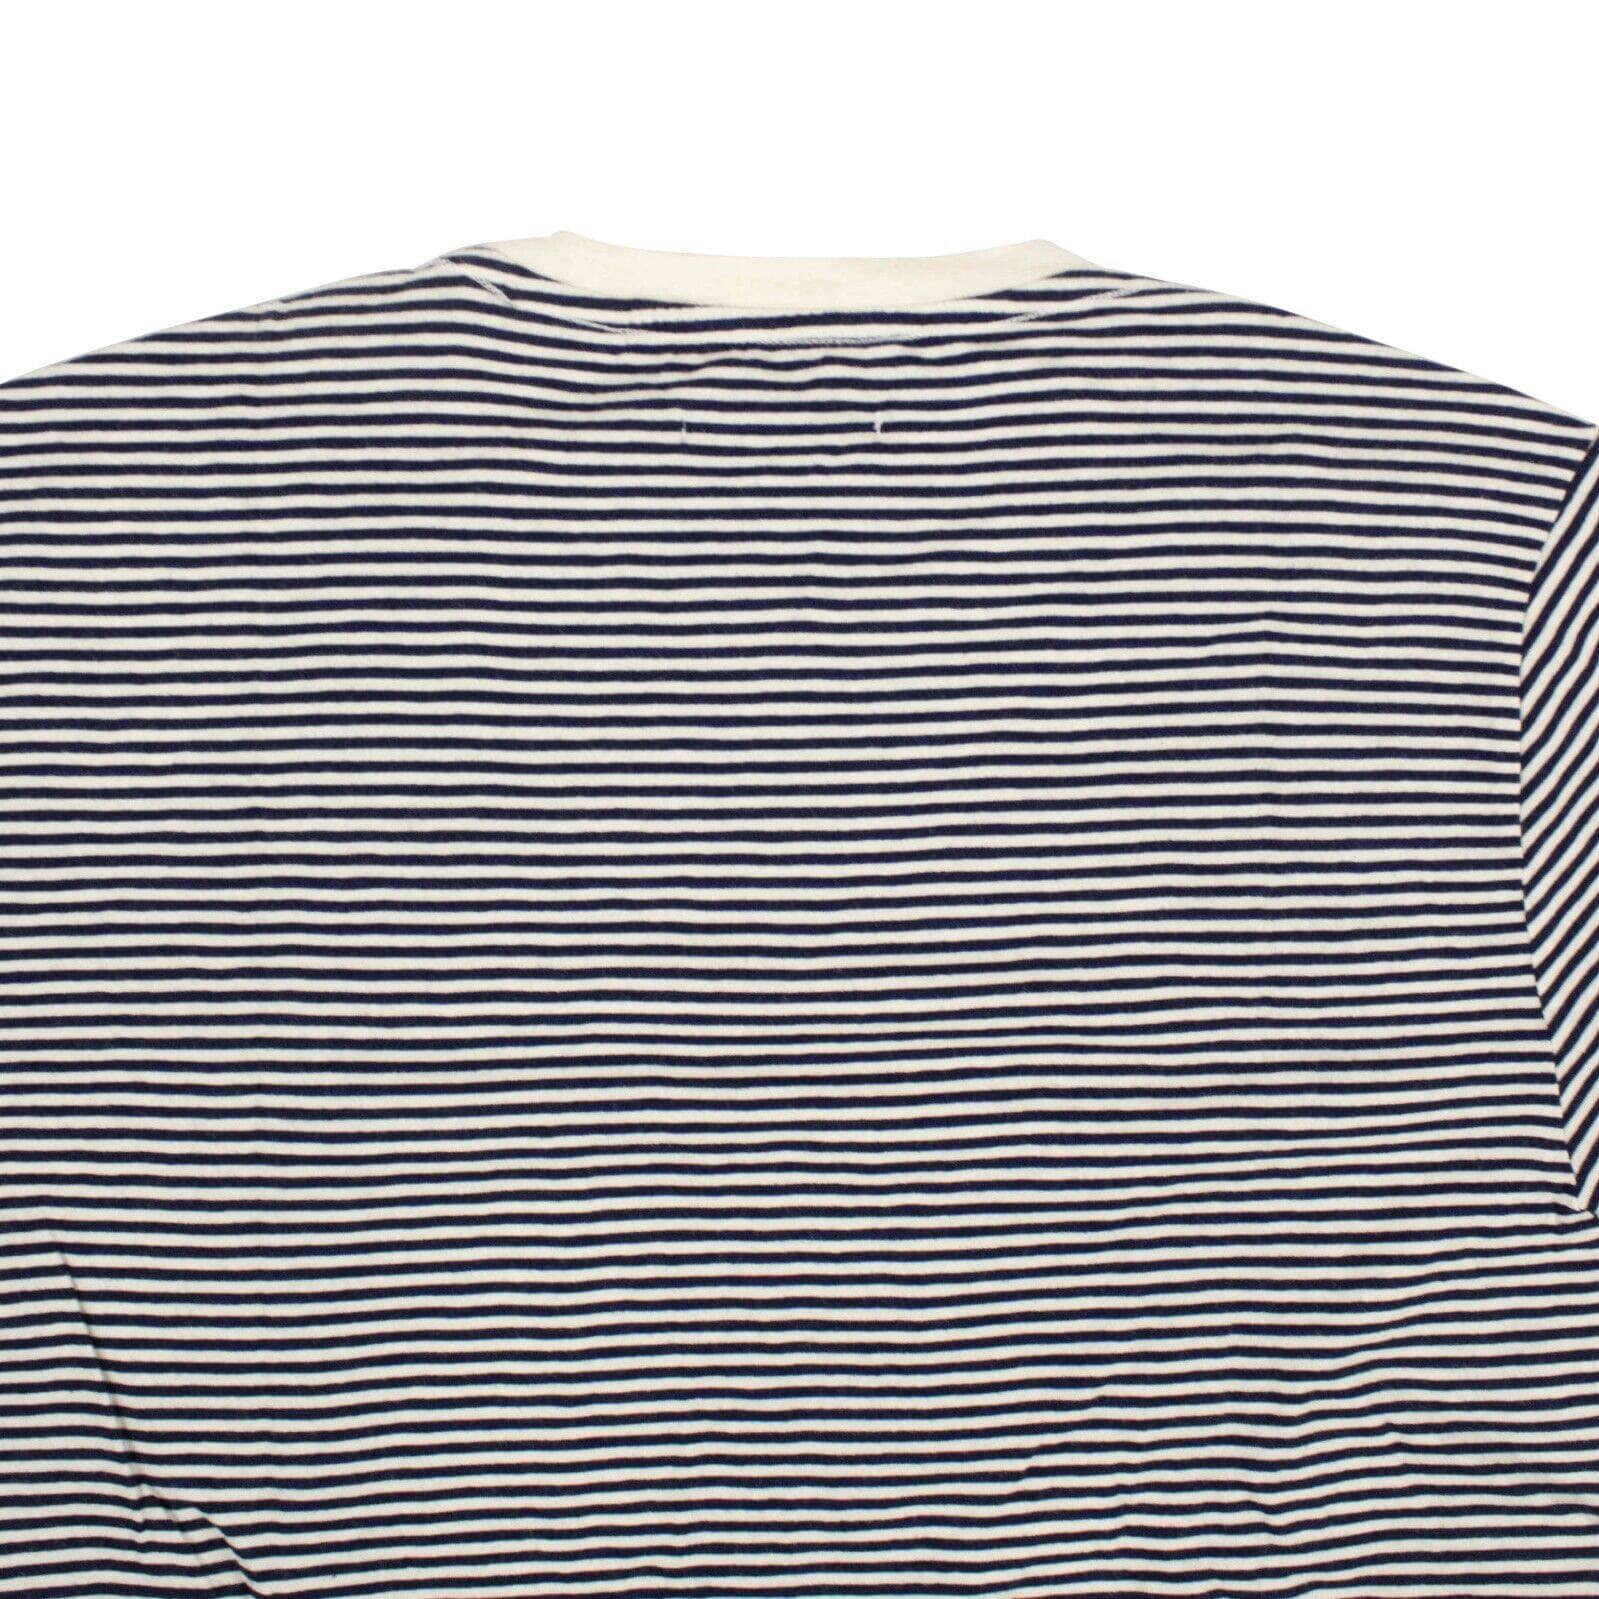 Levi's channelenable-all, chicmi, couponcollection, gender-mens, levis, main-clothing, mens-shoes, MixedApparel, size-1, size-3, size-4, under-250 Navy And White Striped Pocket T-Shirt